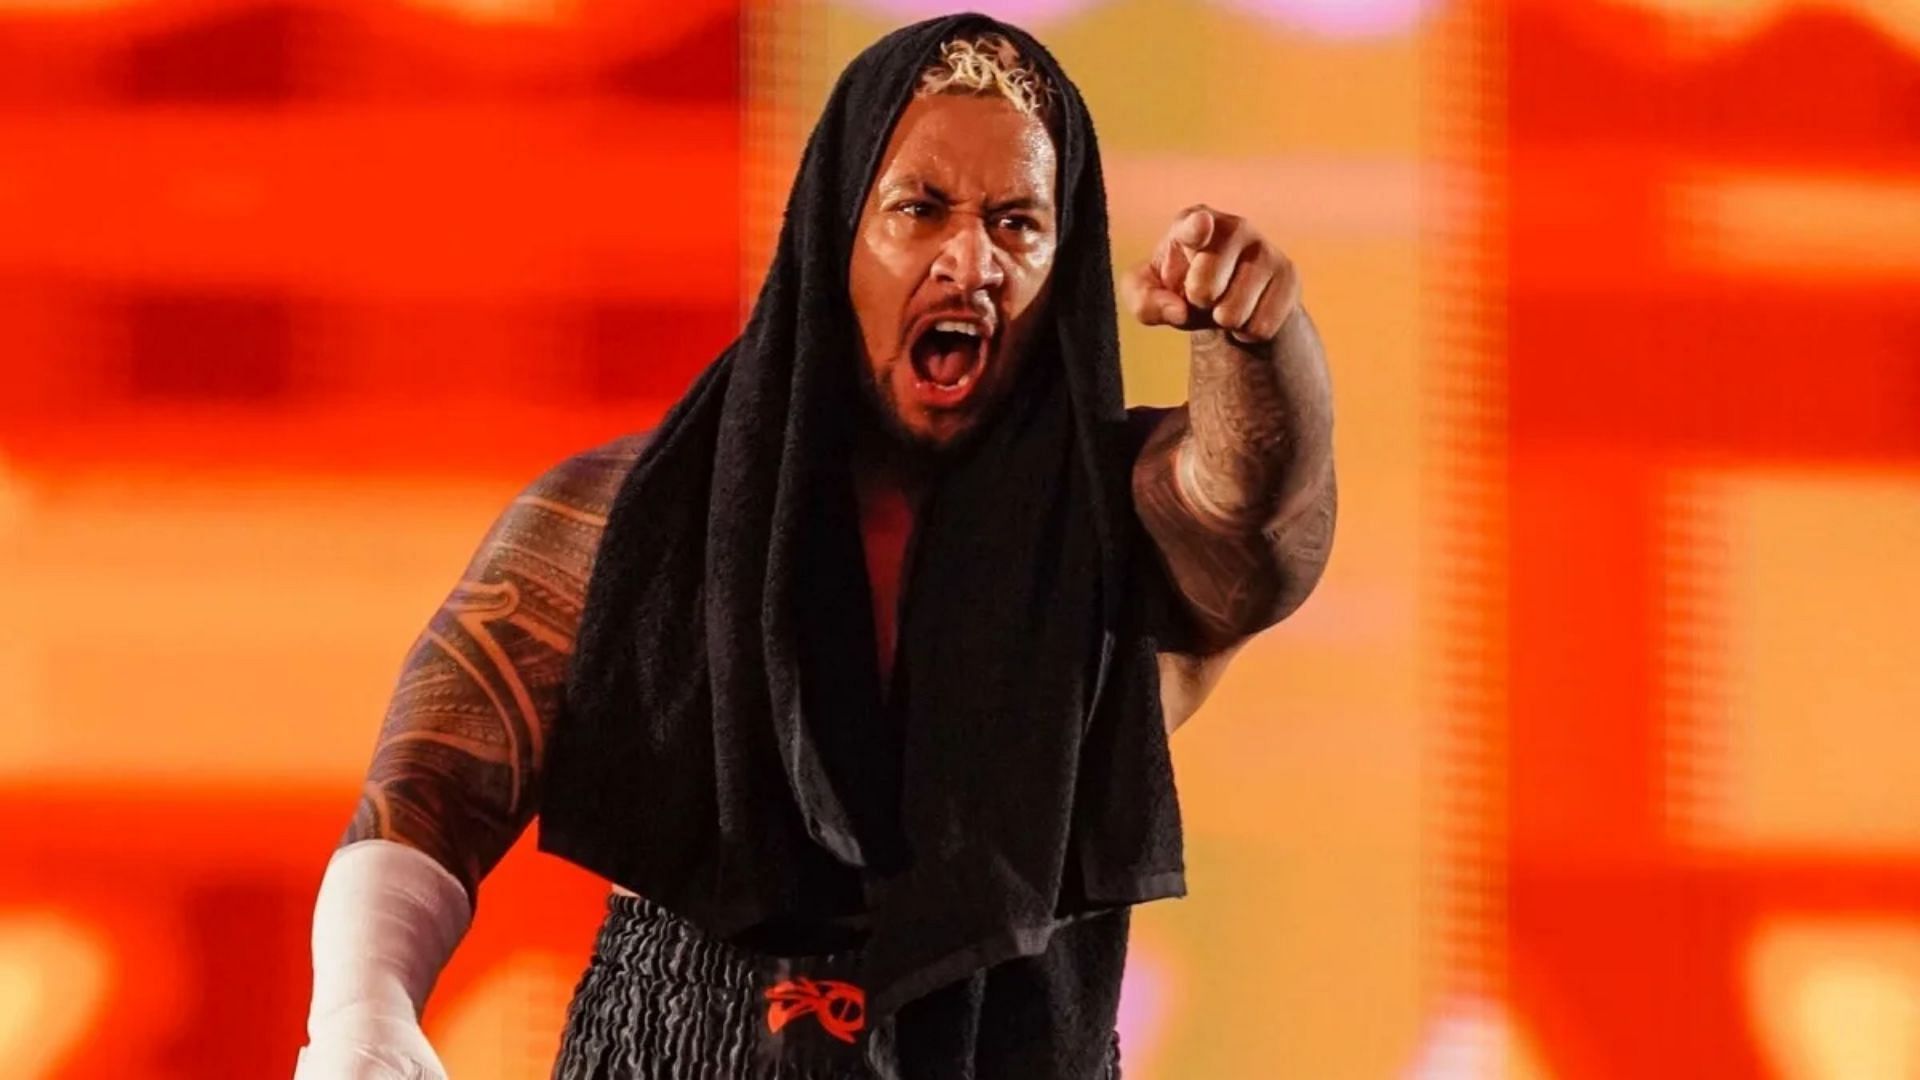 Solo Sikoa is one of the fastest rising stars in WWE